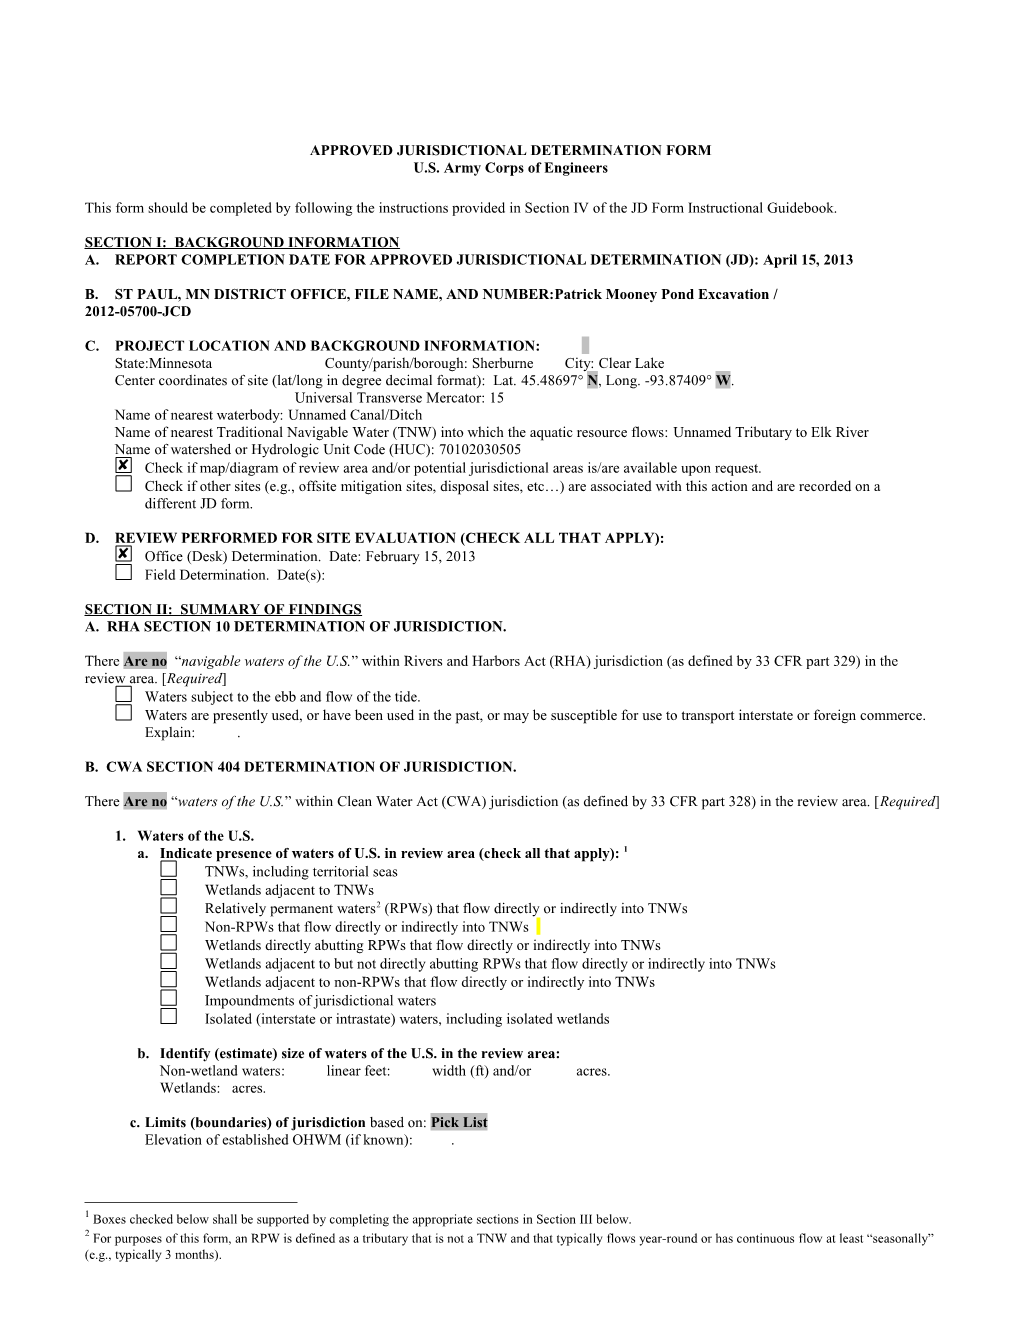 Approved Jurisdictional Determination Form s1